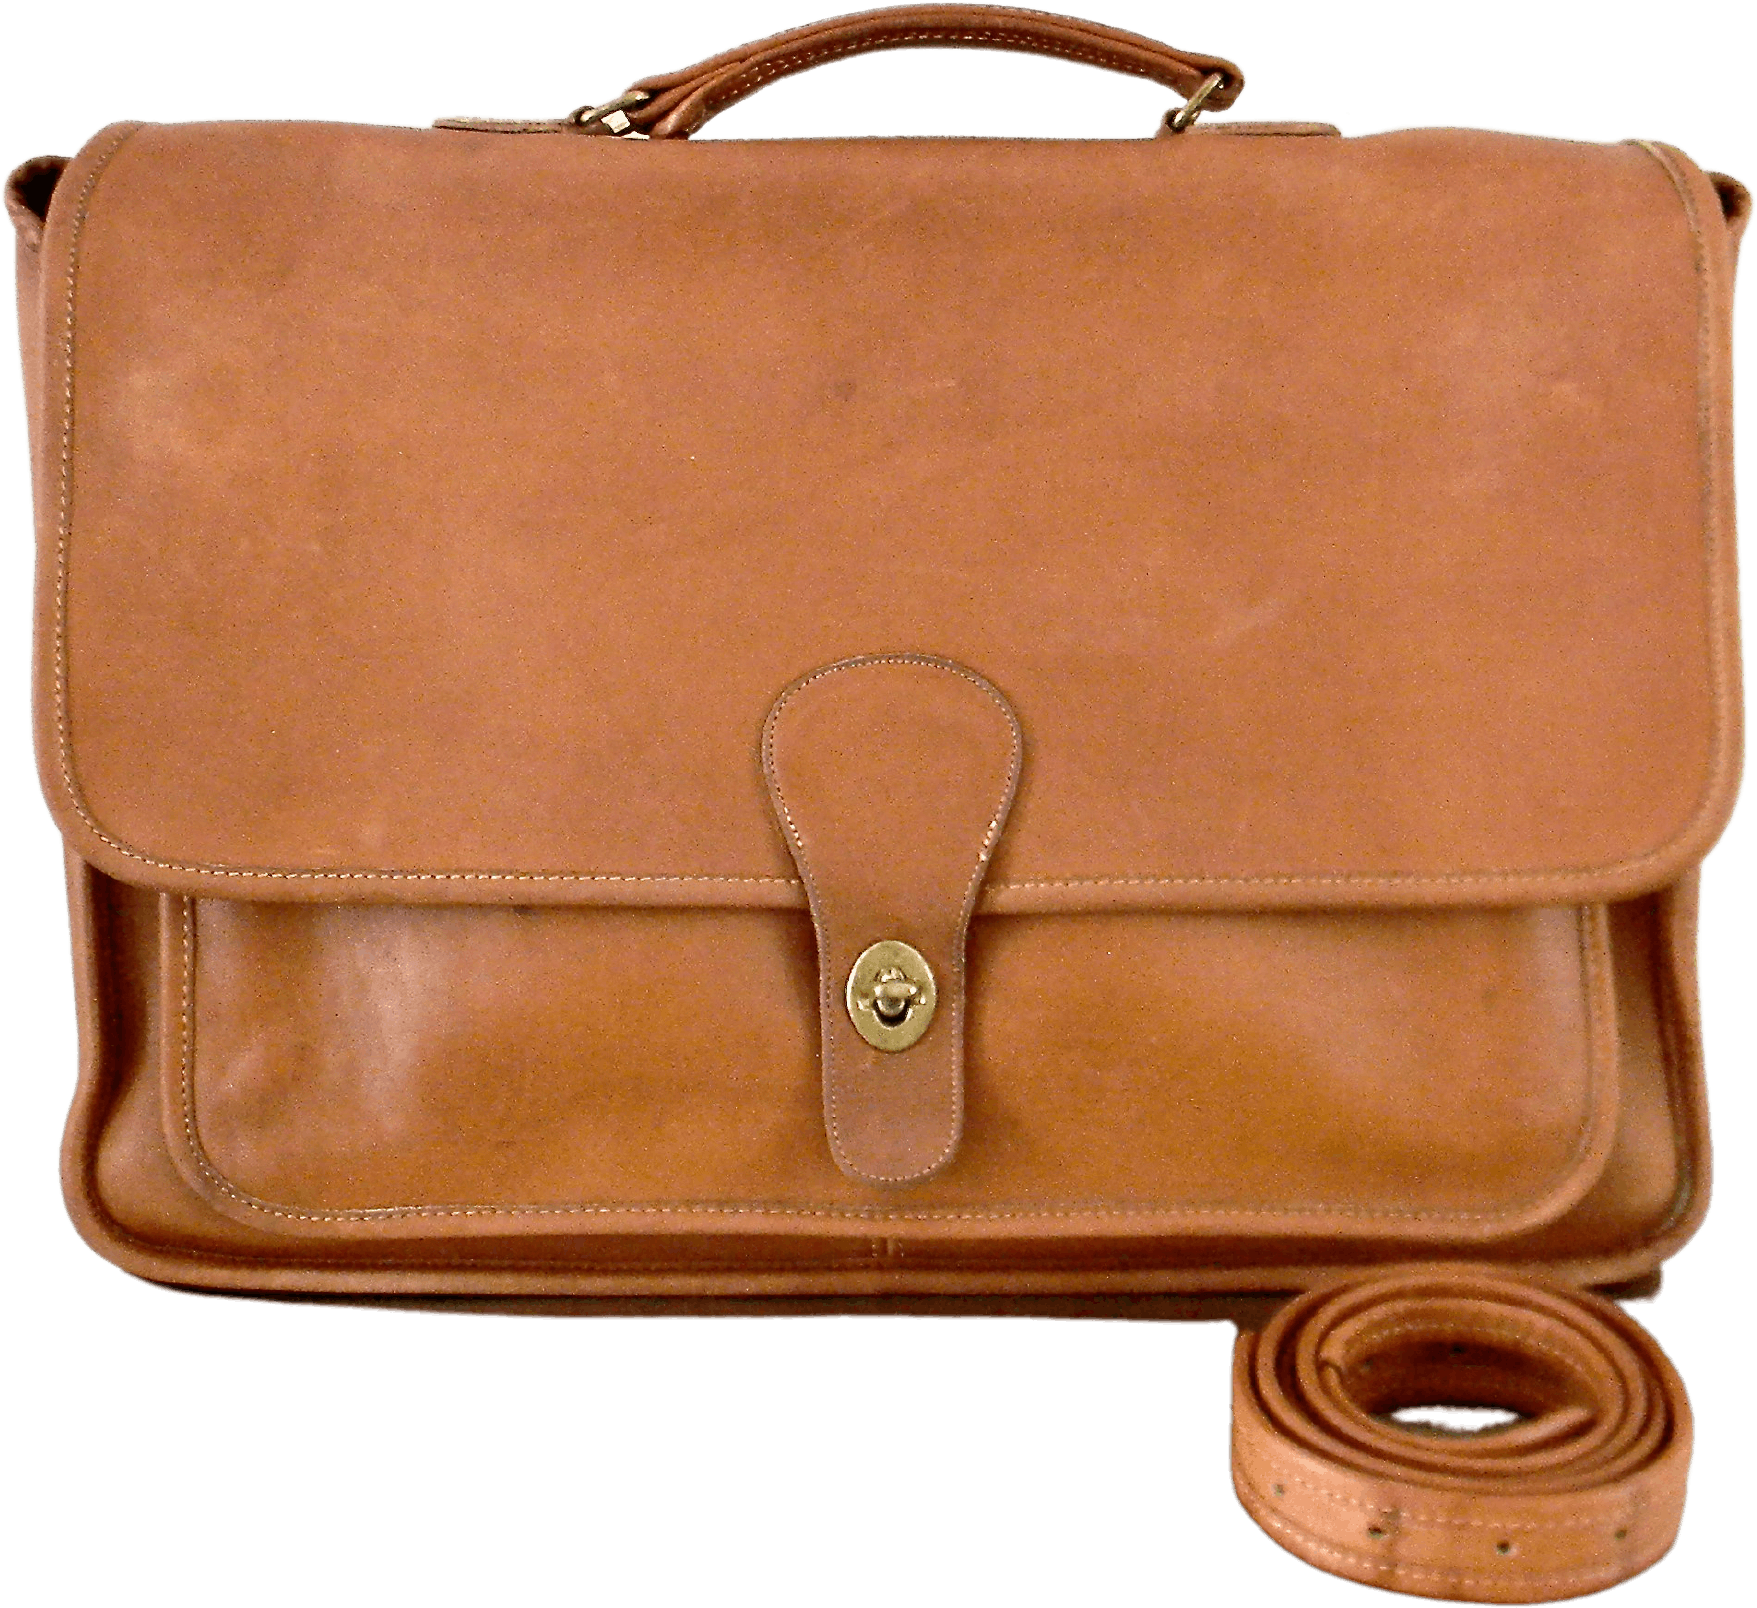 1970s Coach Brown Leather Bag Briefcase Laptop Bag Made in 